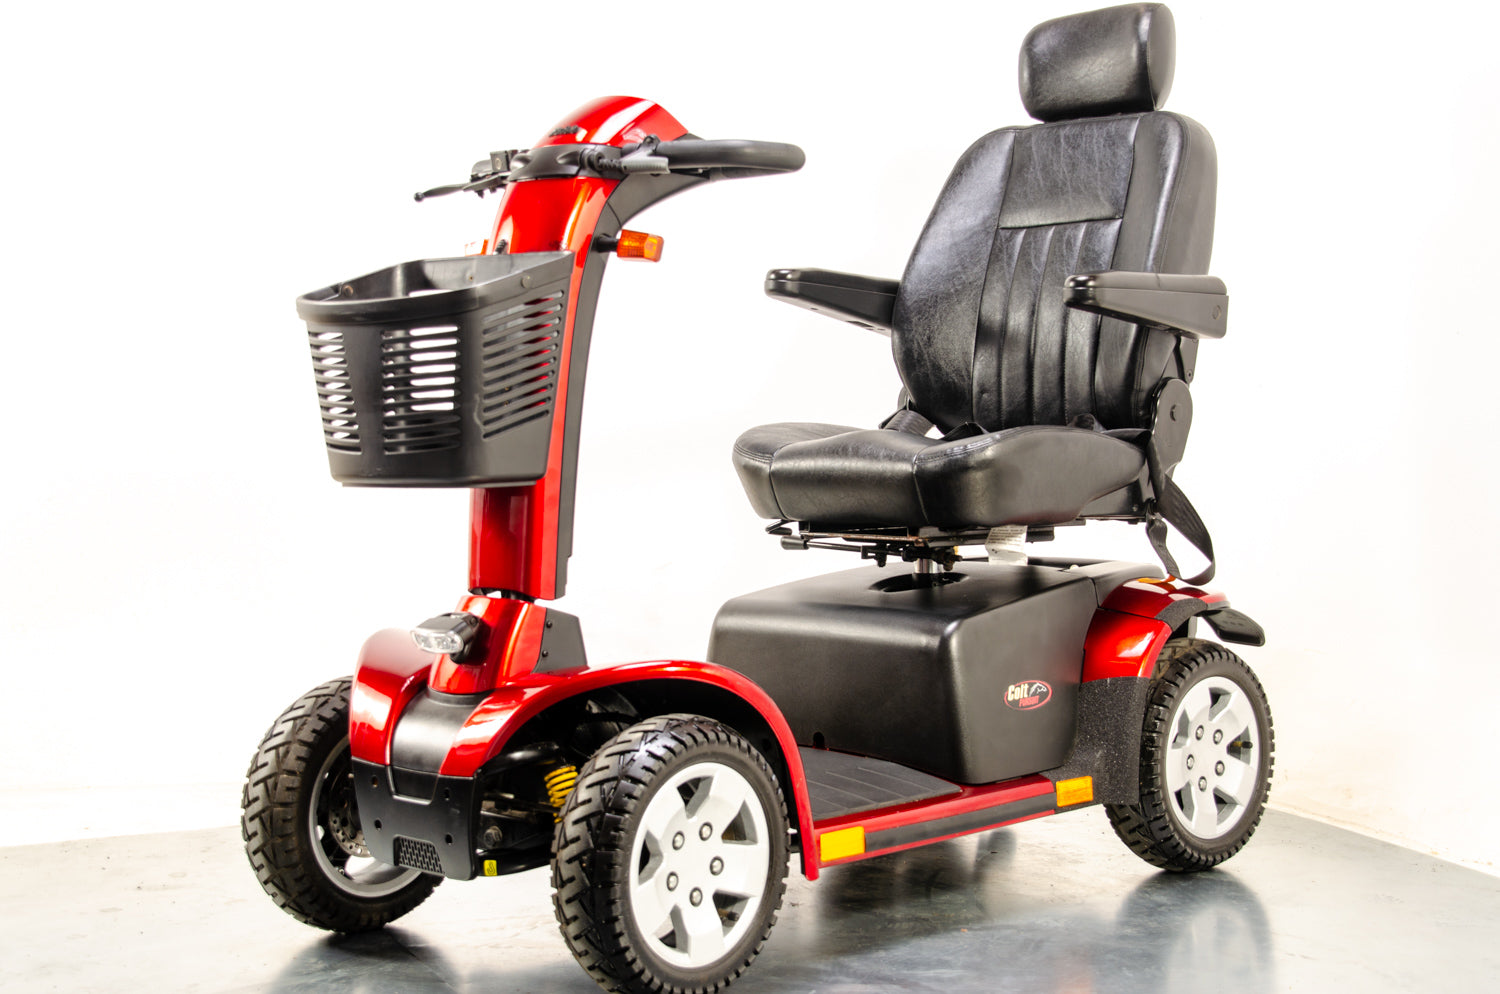 Pride Colt Pursuit Used Mobility Scooter 8mph All-Terrain Transportable Large Off-Road Road Legal Red 13566